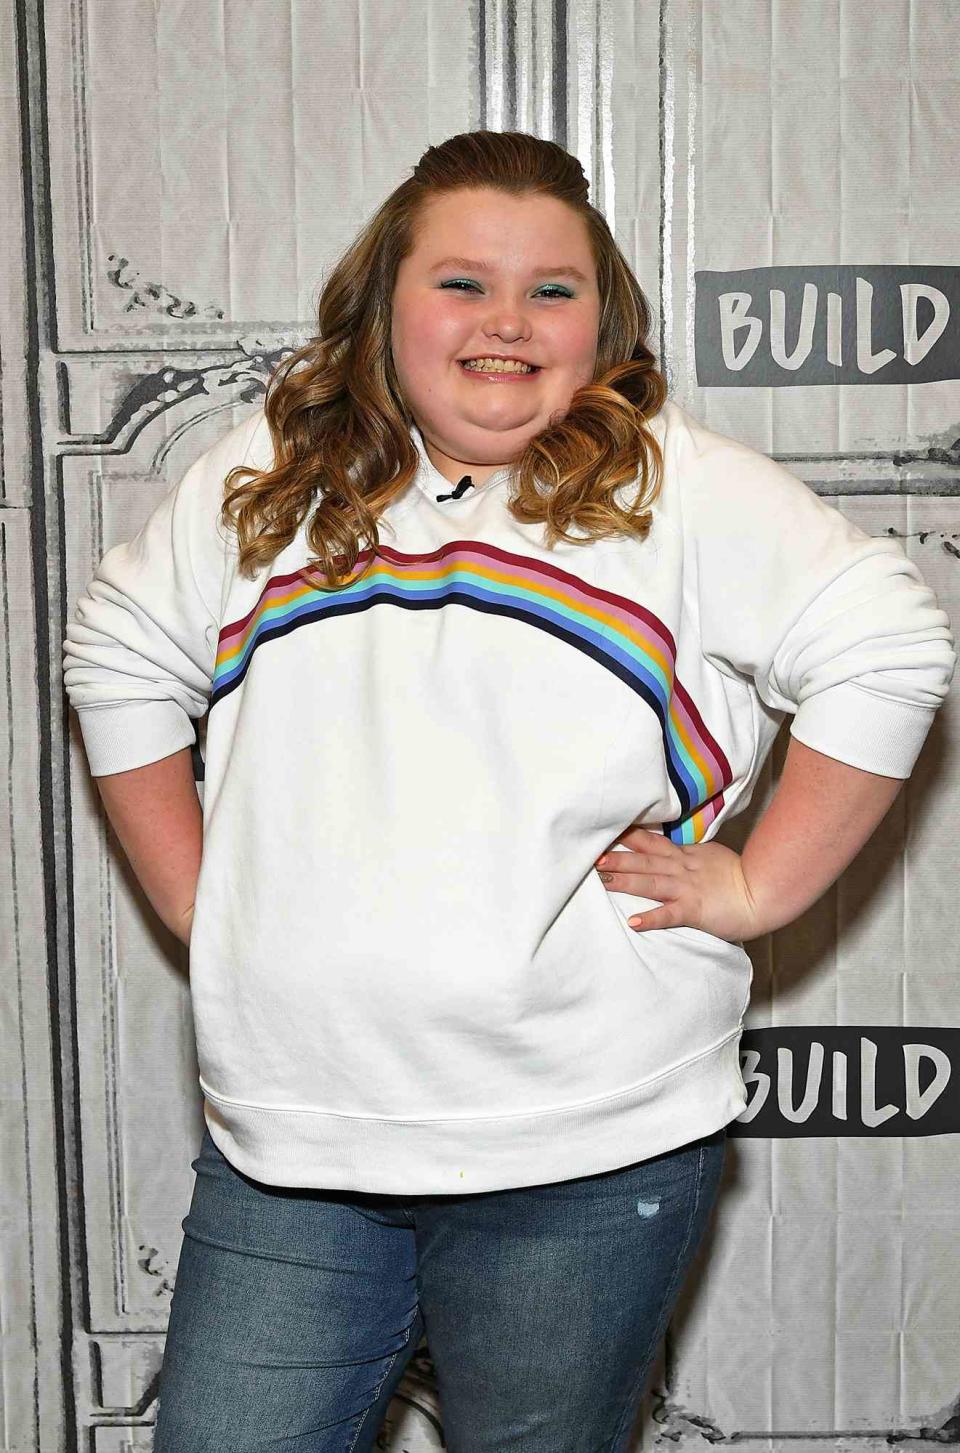 Alana &quot;Honey Boo Boo&quot; Thompson from TLC&#39;s reality TV series &quot;Here Comes Honey Boo Boo&quot; attends Build Brunch at Build Studio on March 14, 2019 in New York City.